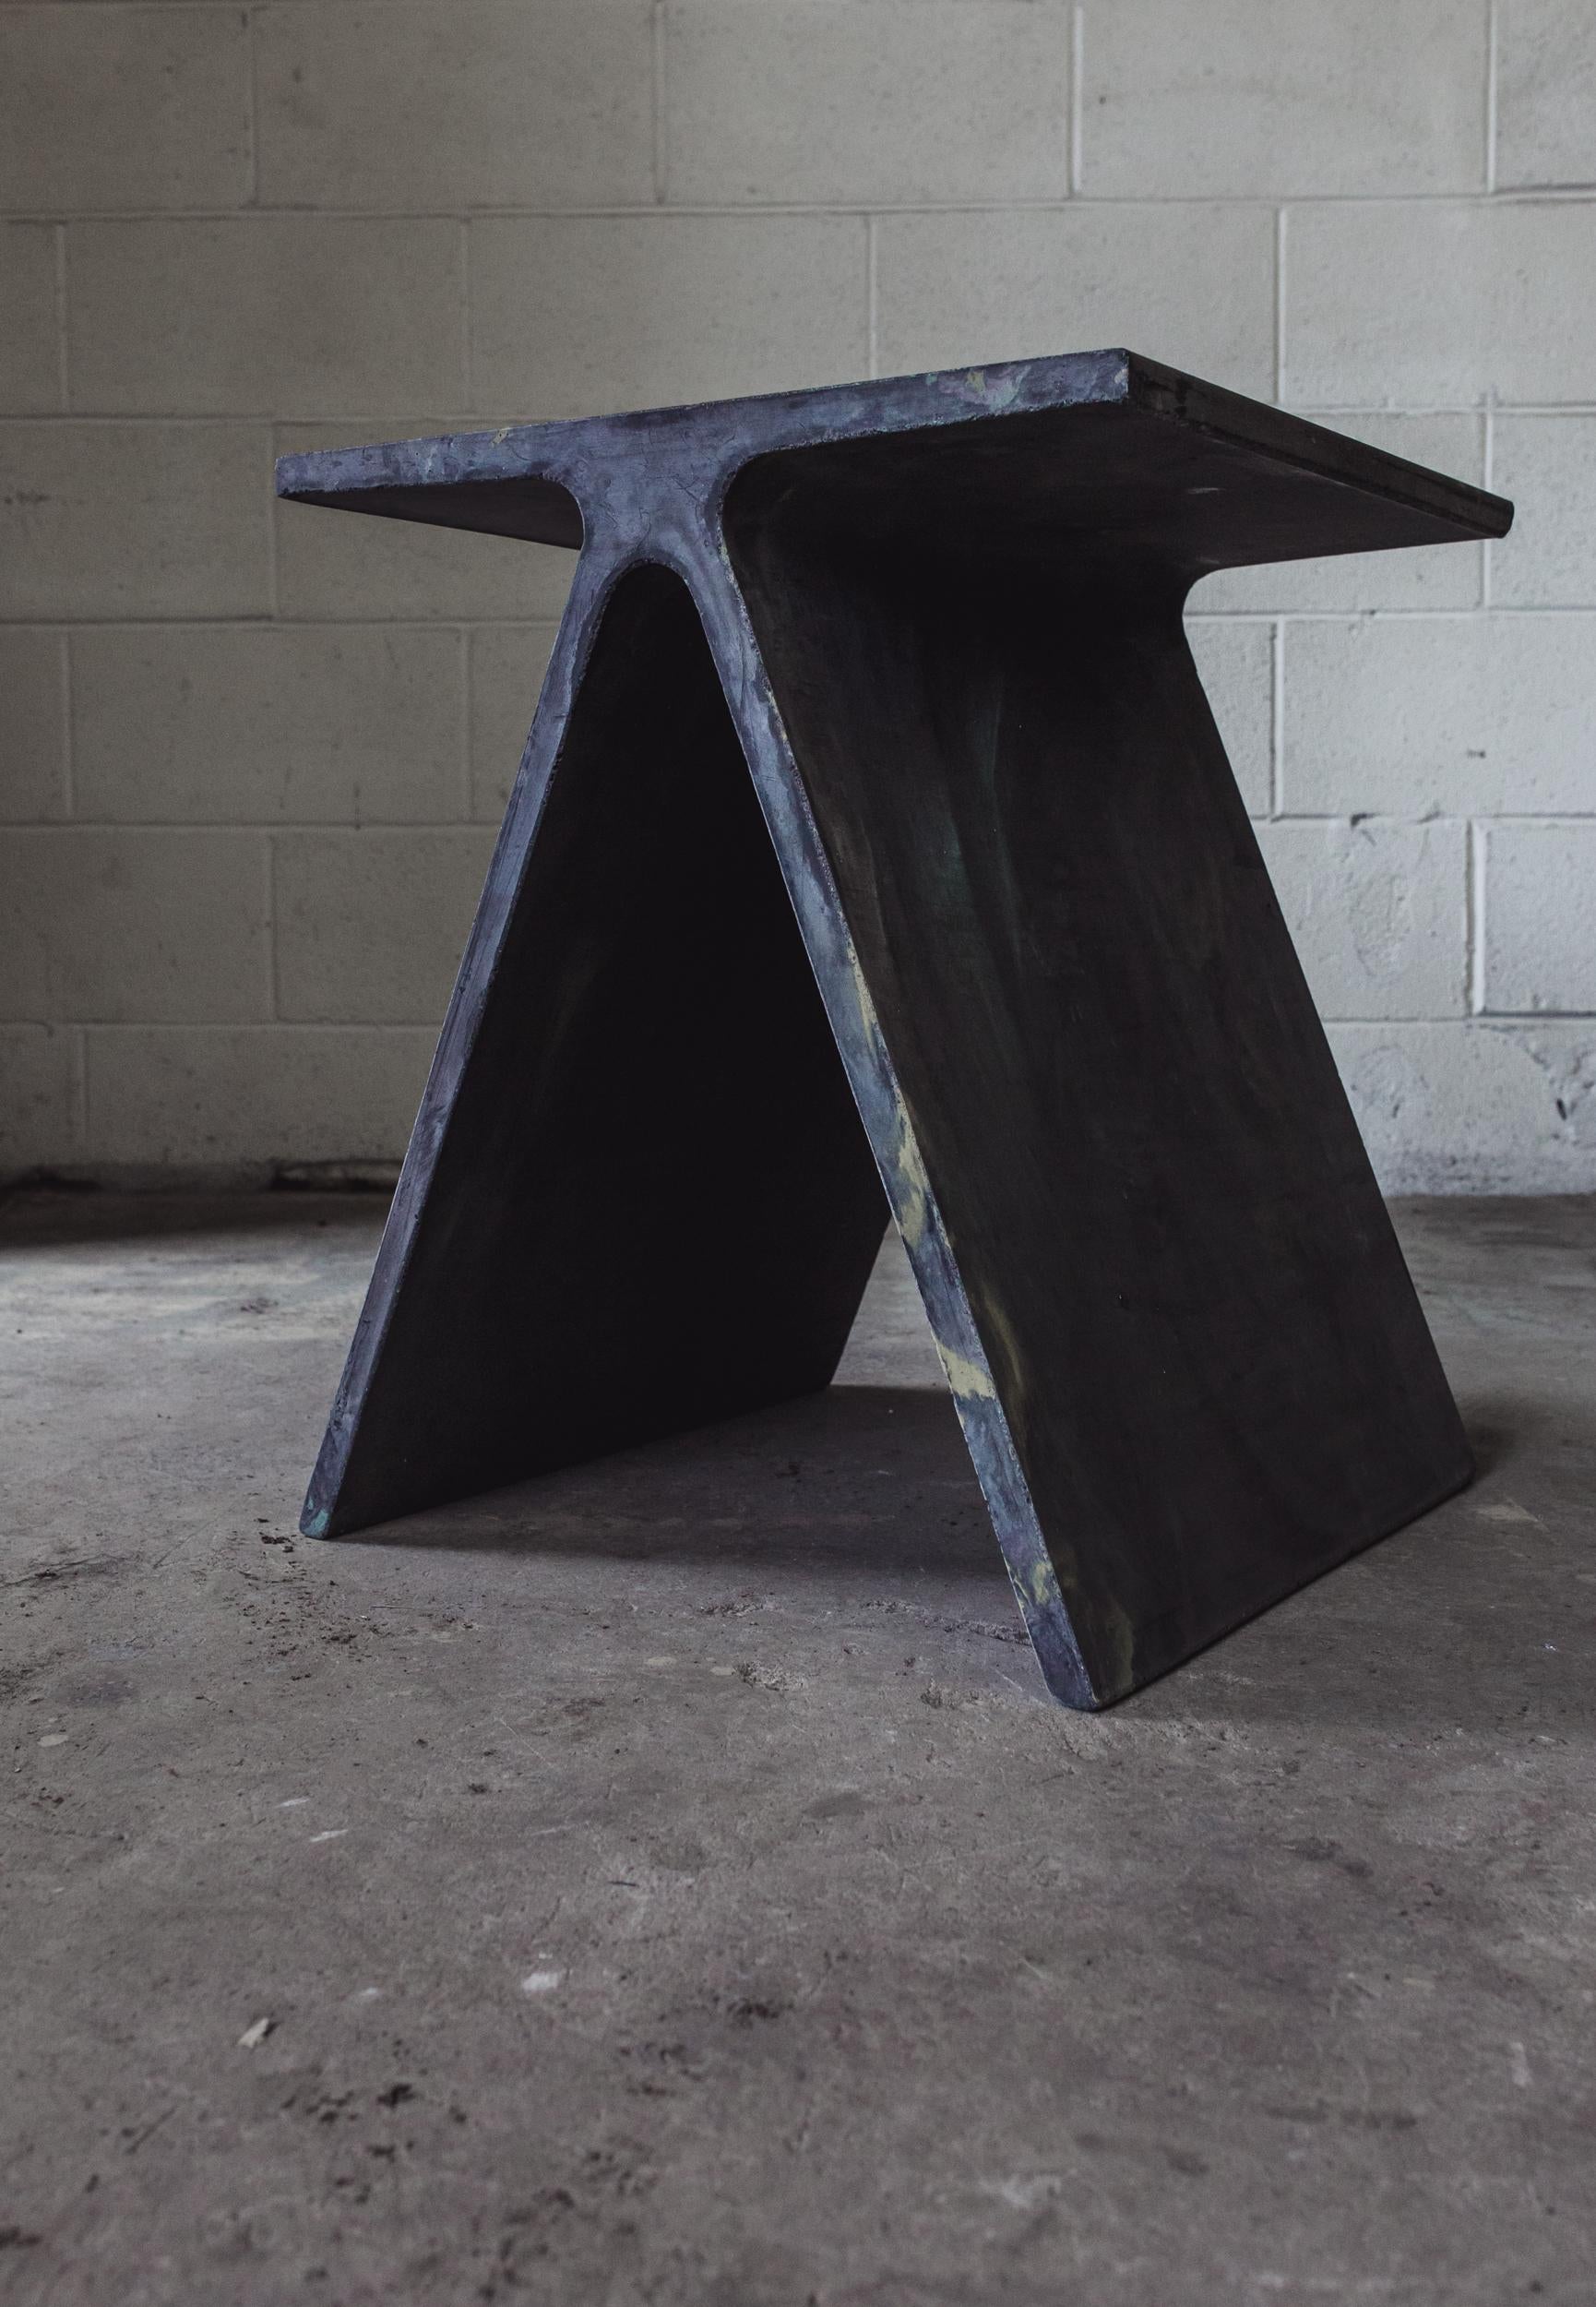 Alpha Q End Table or Stool, Concrete Chapa Ed. for Indoor or Outdoor by Mtharu (Beton) im Angebot